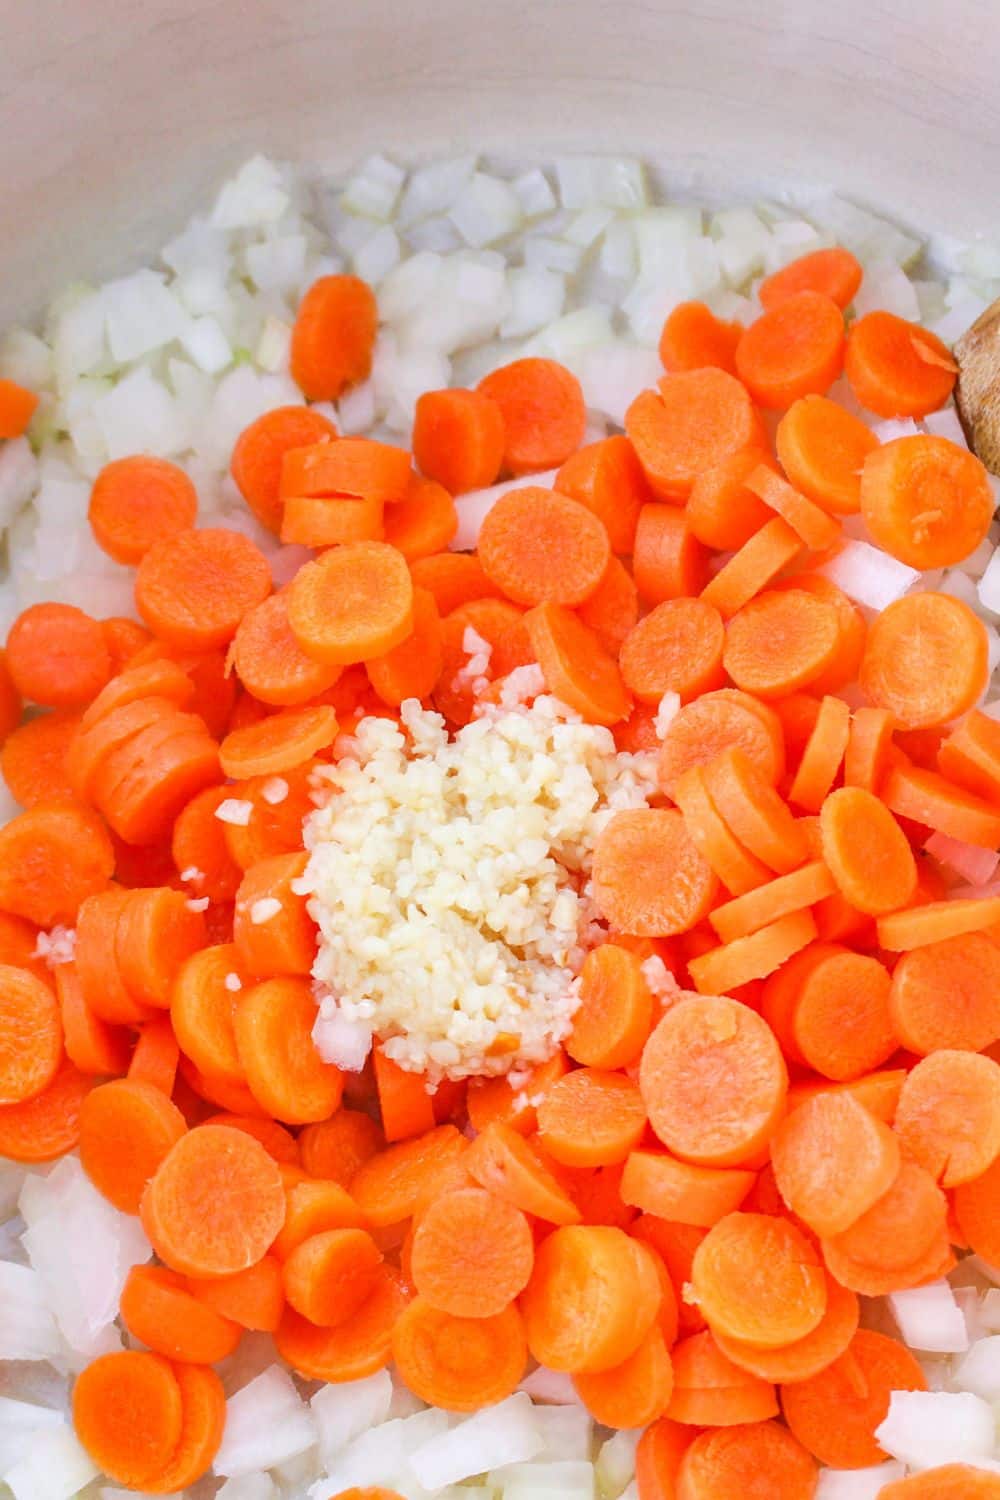 diced onion, carrot and garlic in a stockpot